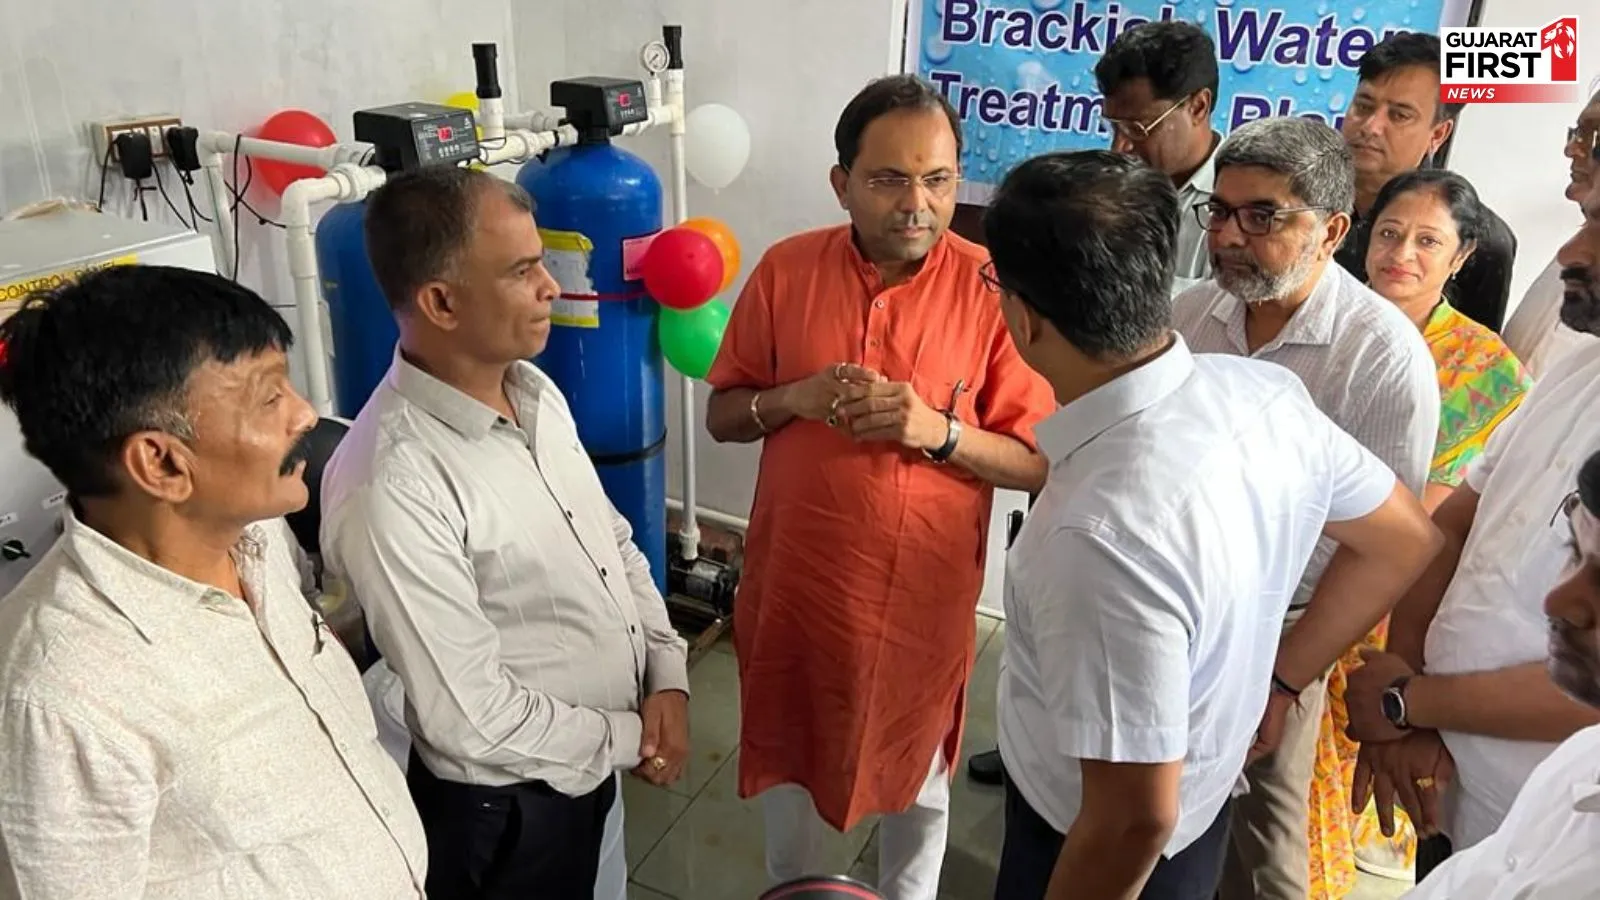 desalination plant was inaugurated